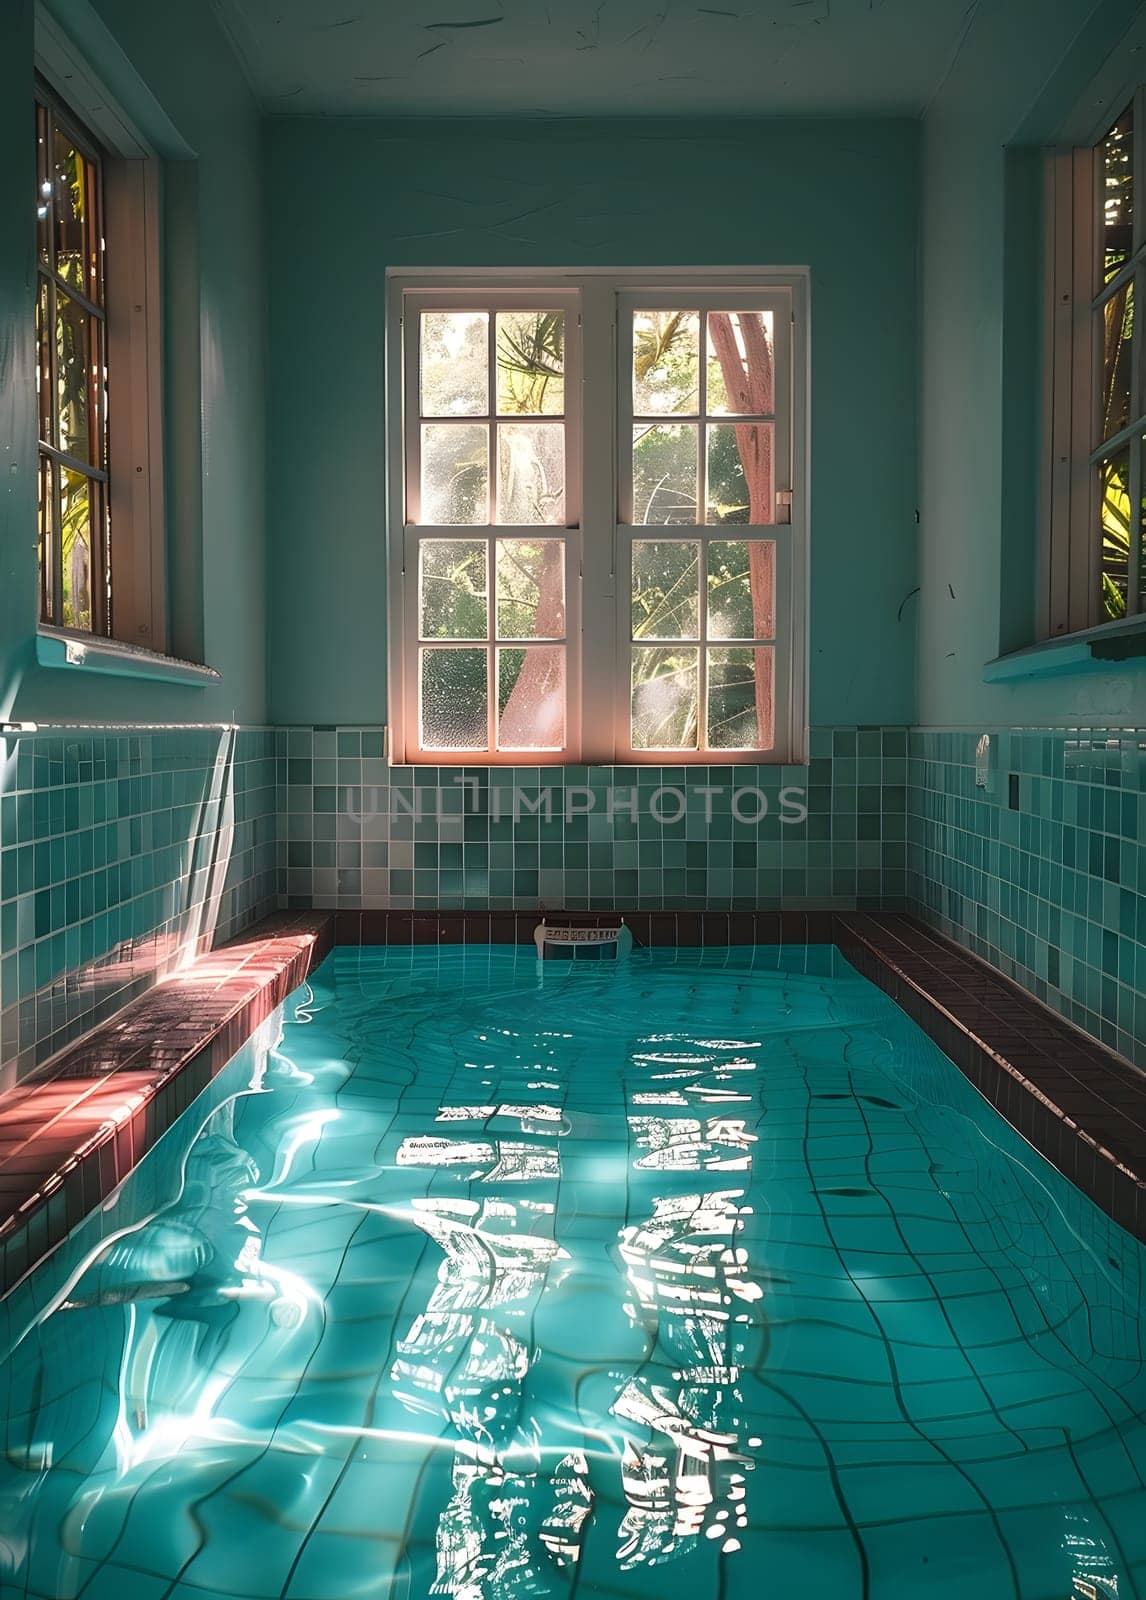 A small indoor swimming pool, shaped like a rectangle, with a window in the background. It is a fixture in the building, offering recreation on the water flooring